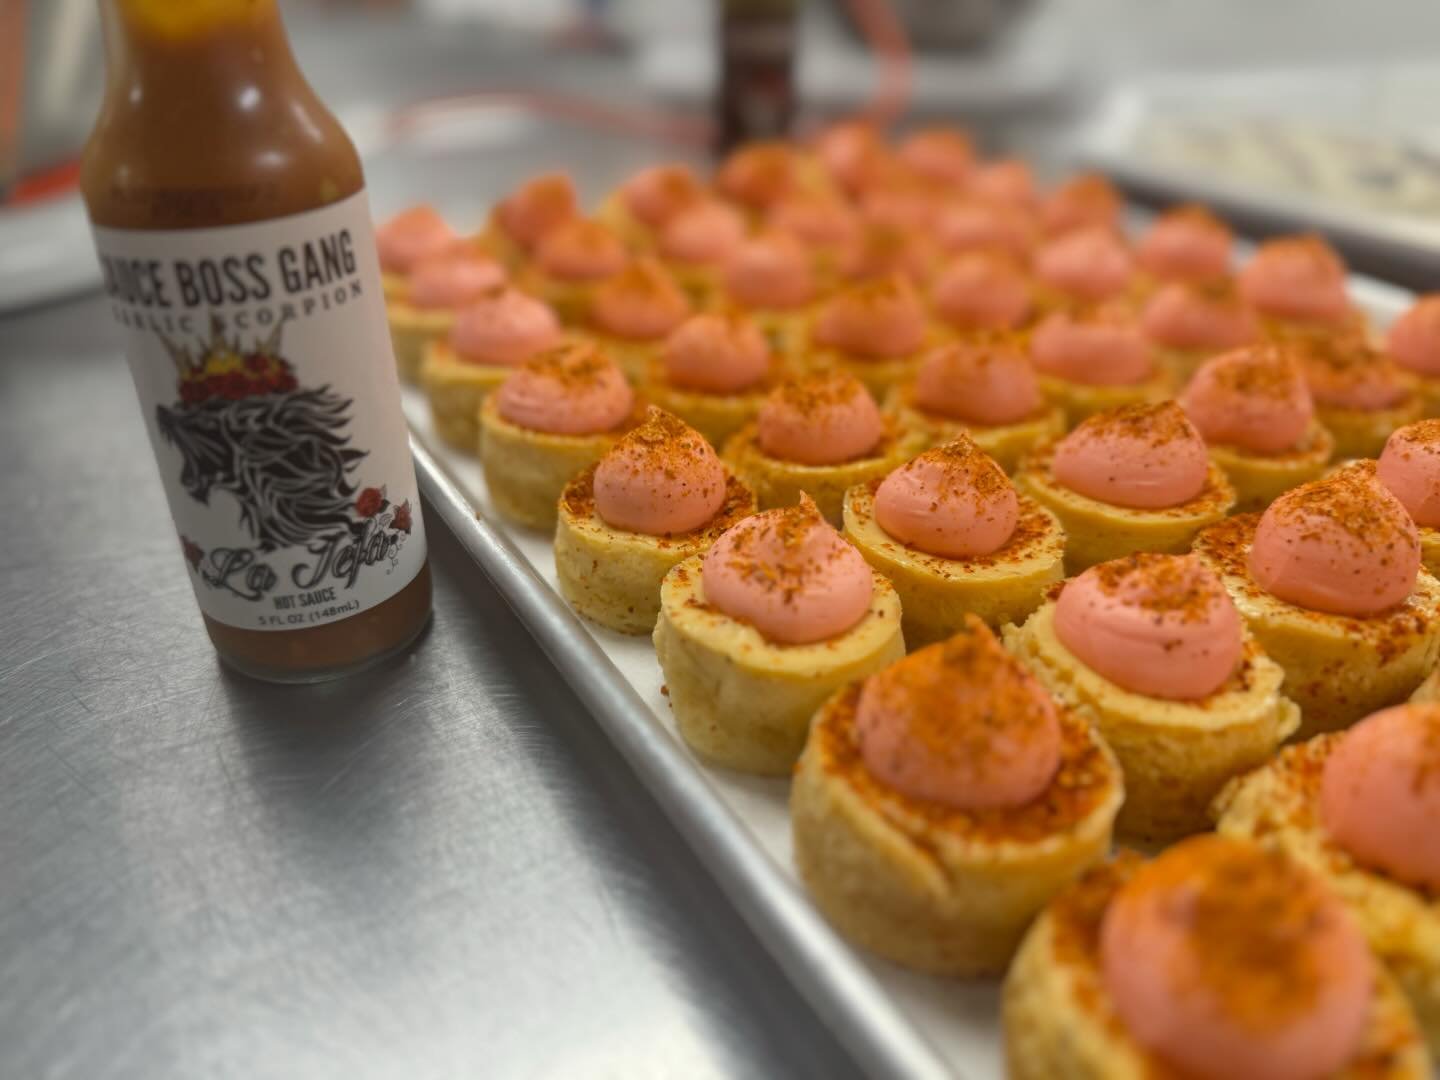 🌶️🔥Spicy Specials🔥🌶️ we teamed up with @saucebossgang for the @columbuscrew Hell is Real game this weekend! These minis are available at @budddairyfoodhall only - headed out on delivery today and only available while supplies last! 

🍹Spicy Marg